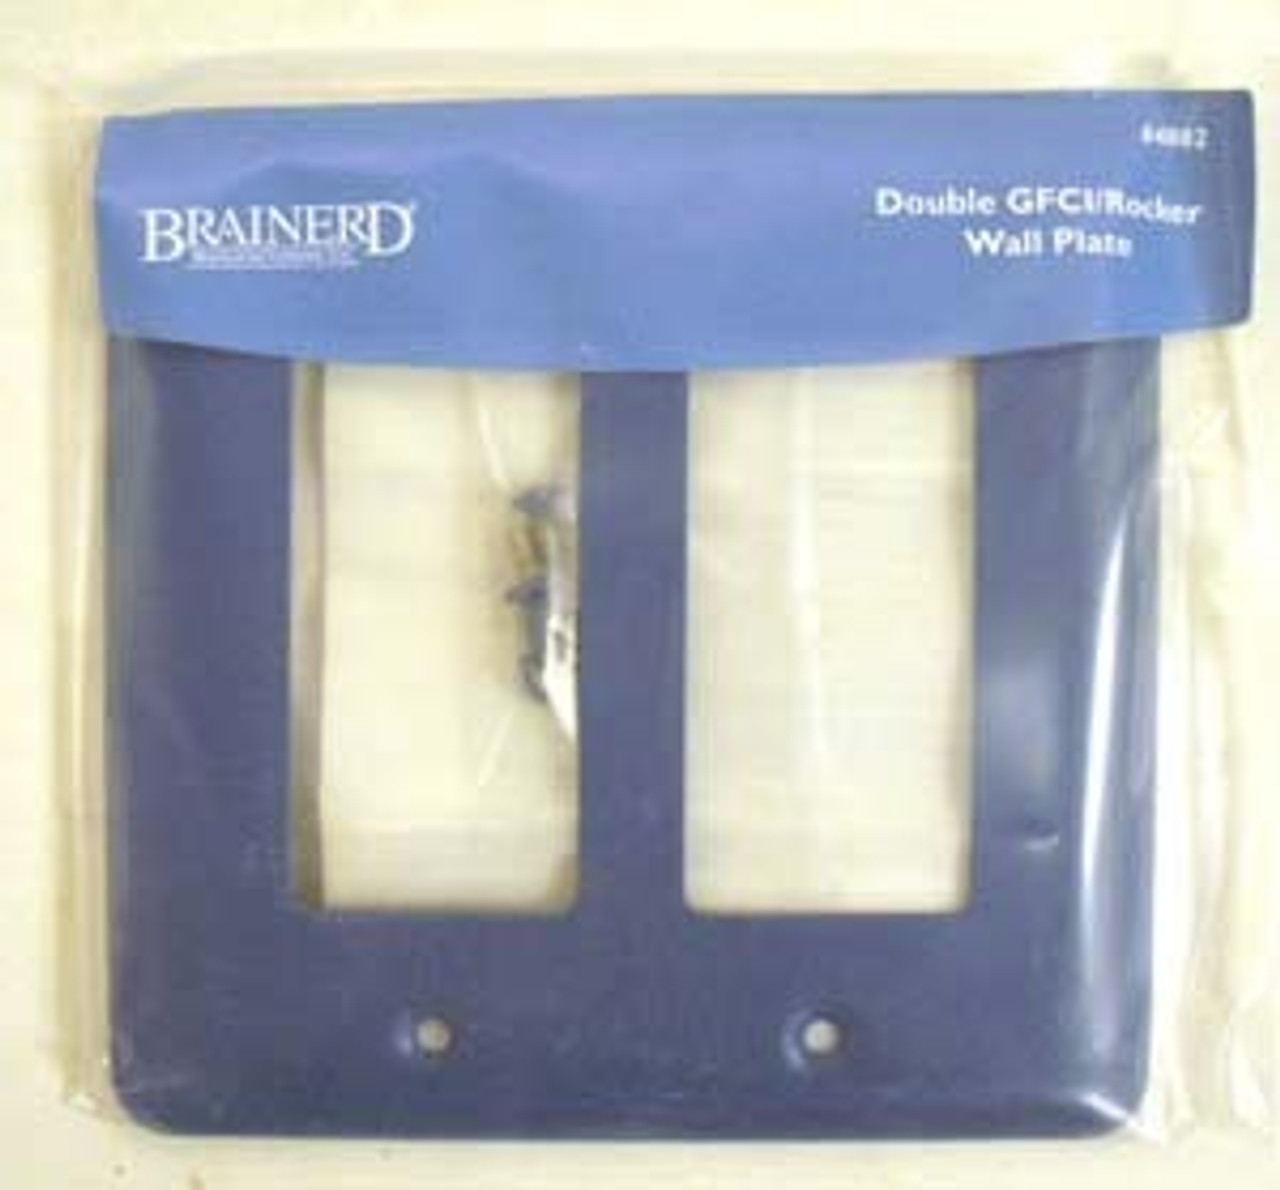 64082 Stamped Blue Double GFI Rocker Outlet Switch Cover